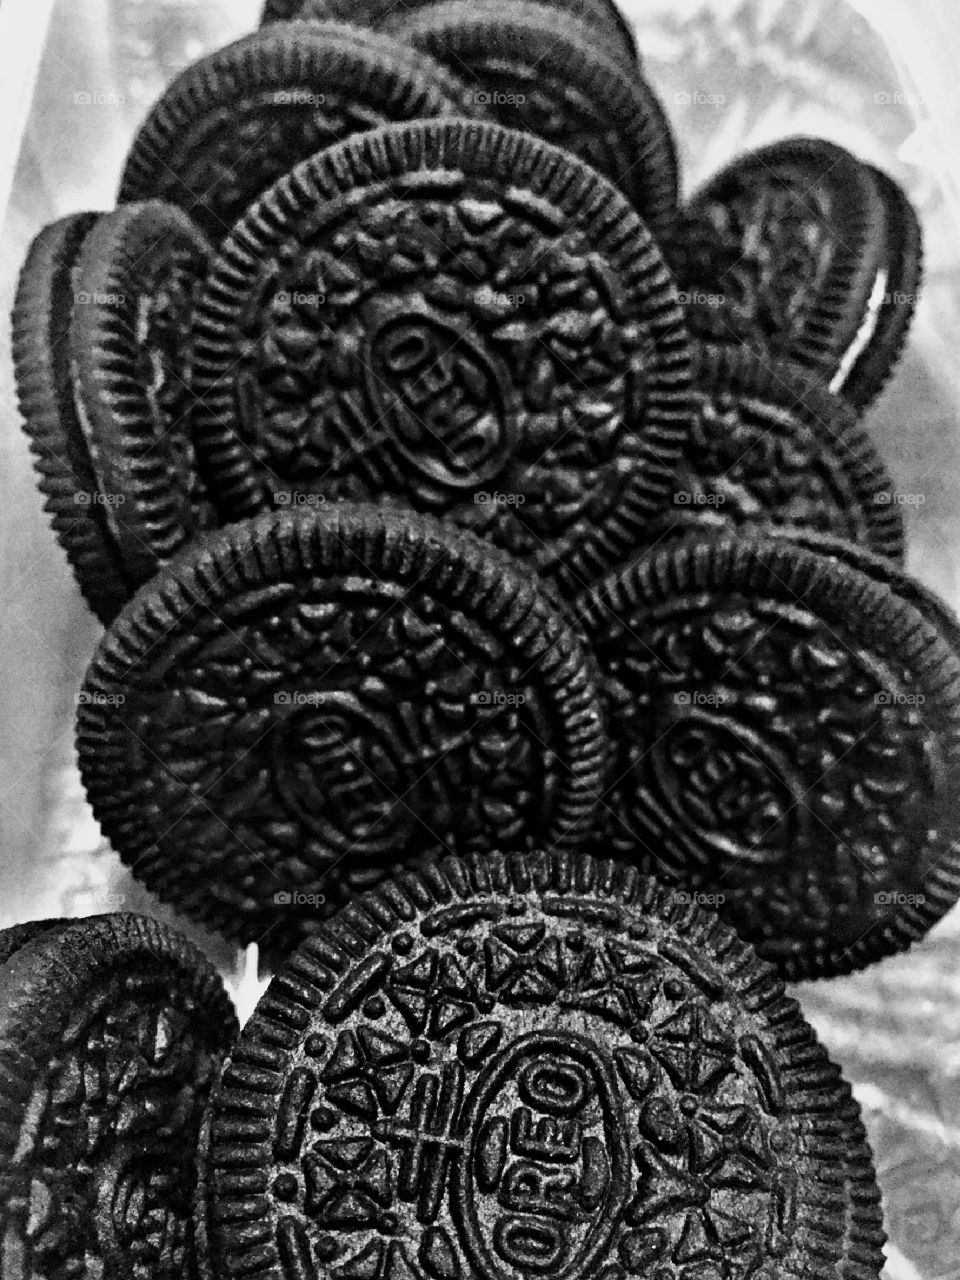 The best moment is when you really enjoy the delicious oreo cookies . Just keep calm and eat oreo with smile.